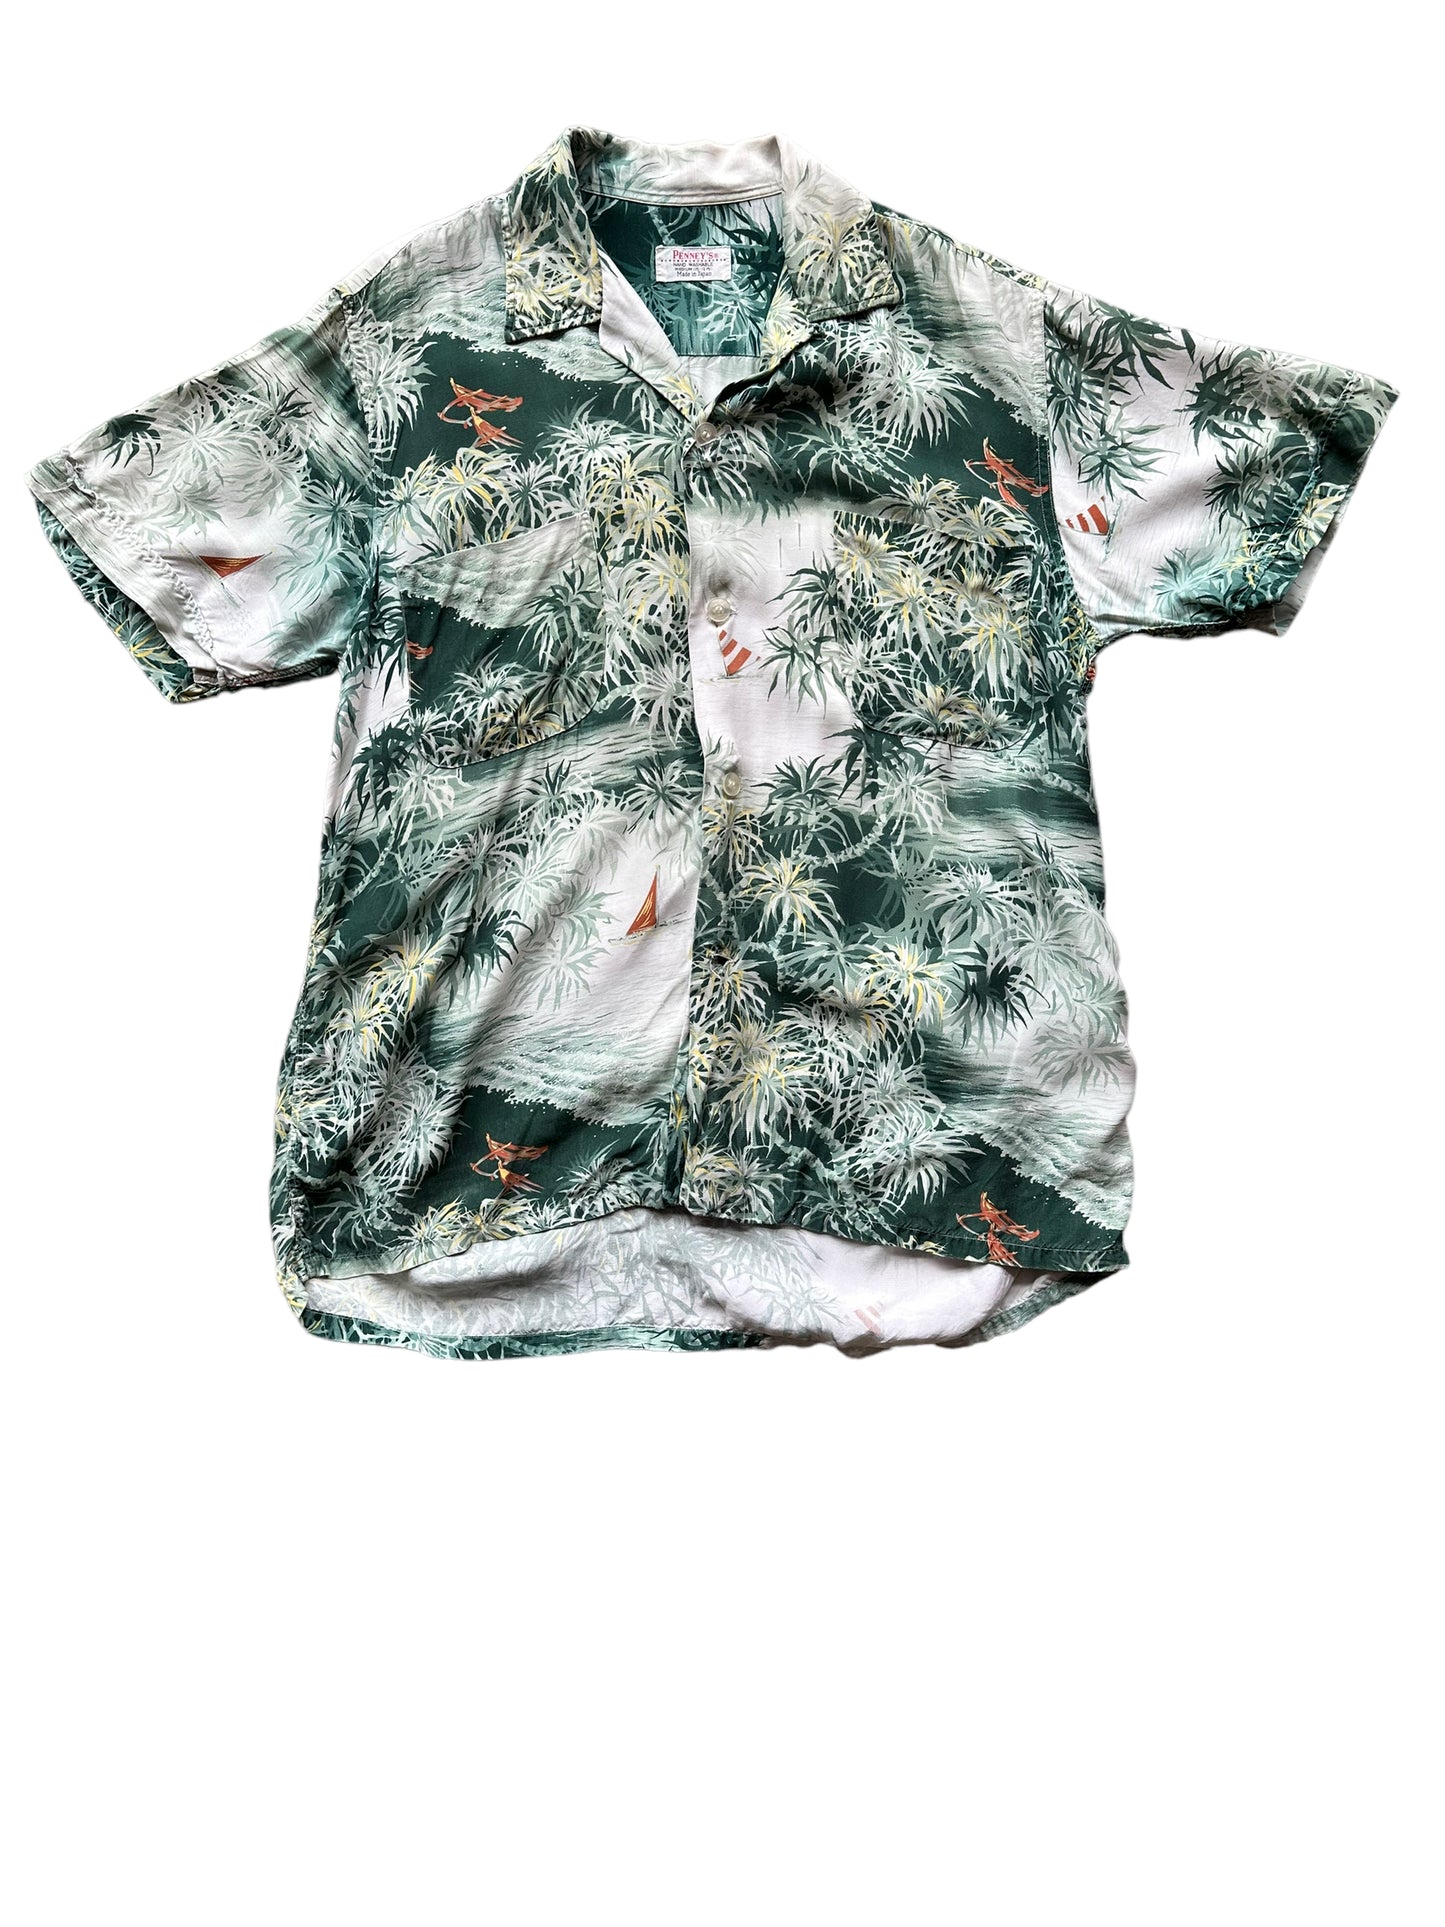 Front shot of Vintage Made in Japan Penney's Green Floral Aloha Shirt SZ M | Seattle Vintage Rayon Hawaiian Shirt | Barn Owl Vintage Clothing Seattle